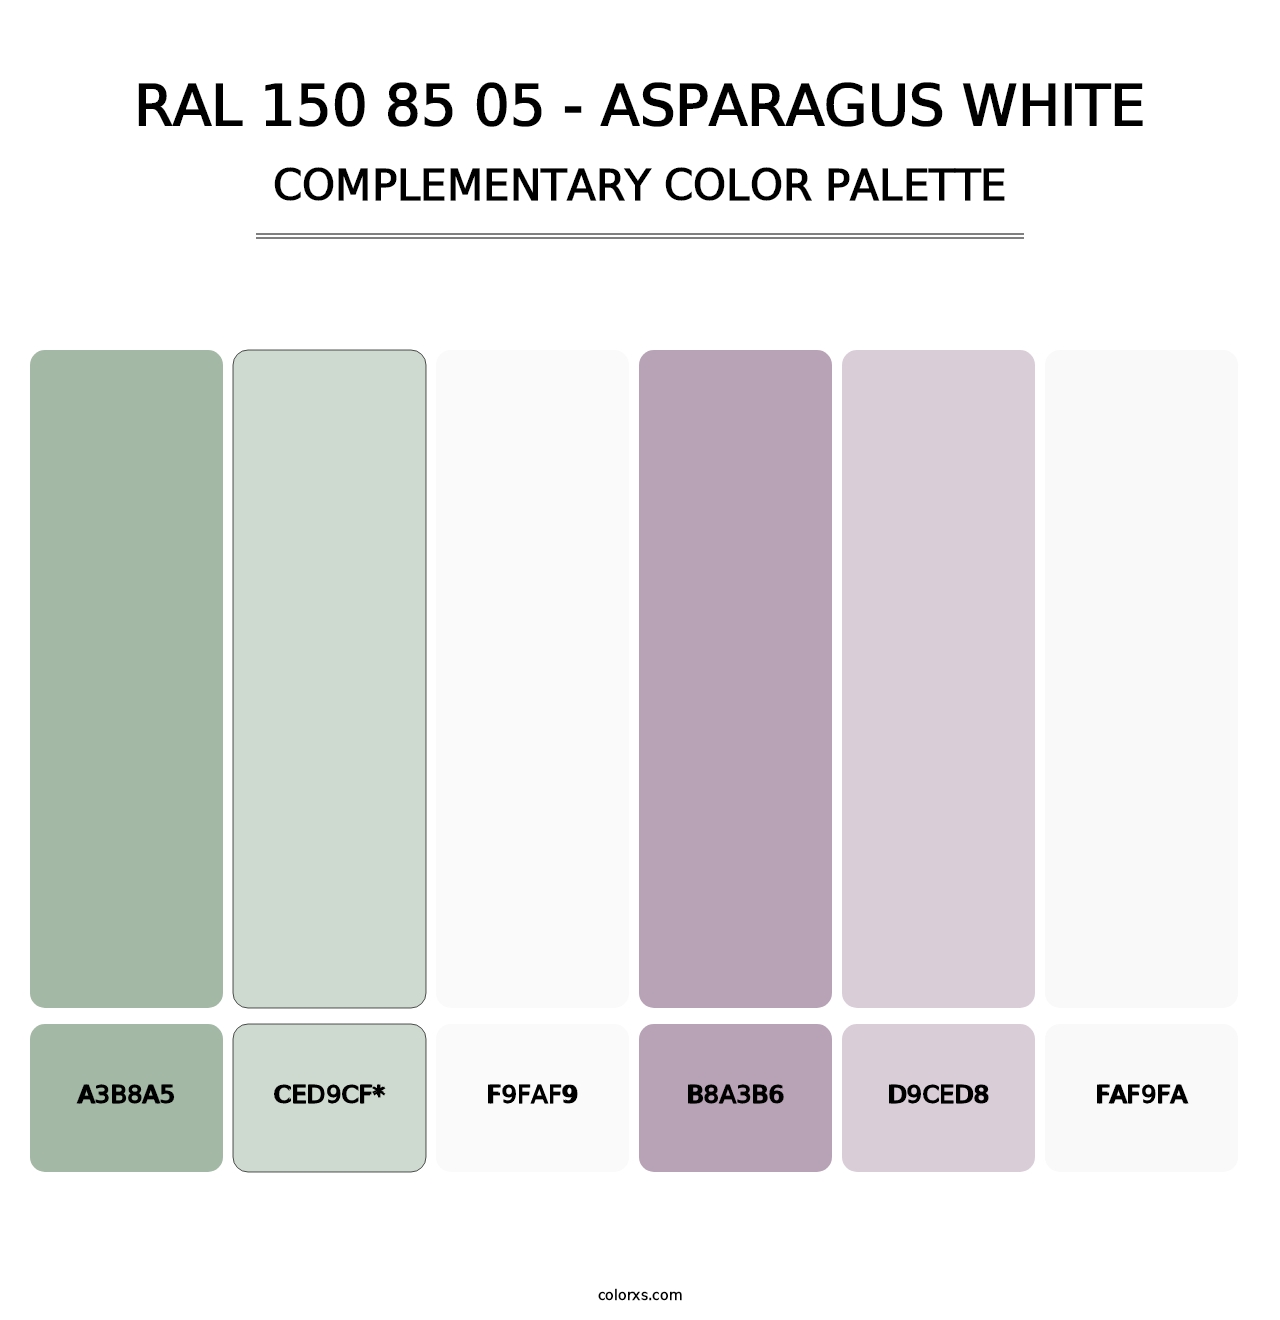 RAL 150 85 05 - Asparagus White - Complementary Color Palette